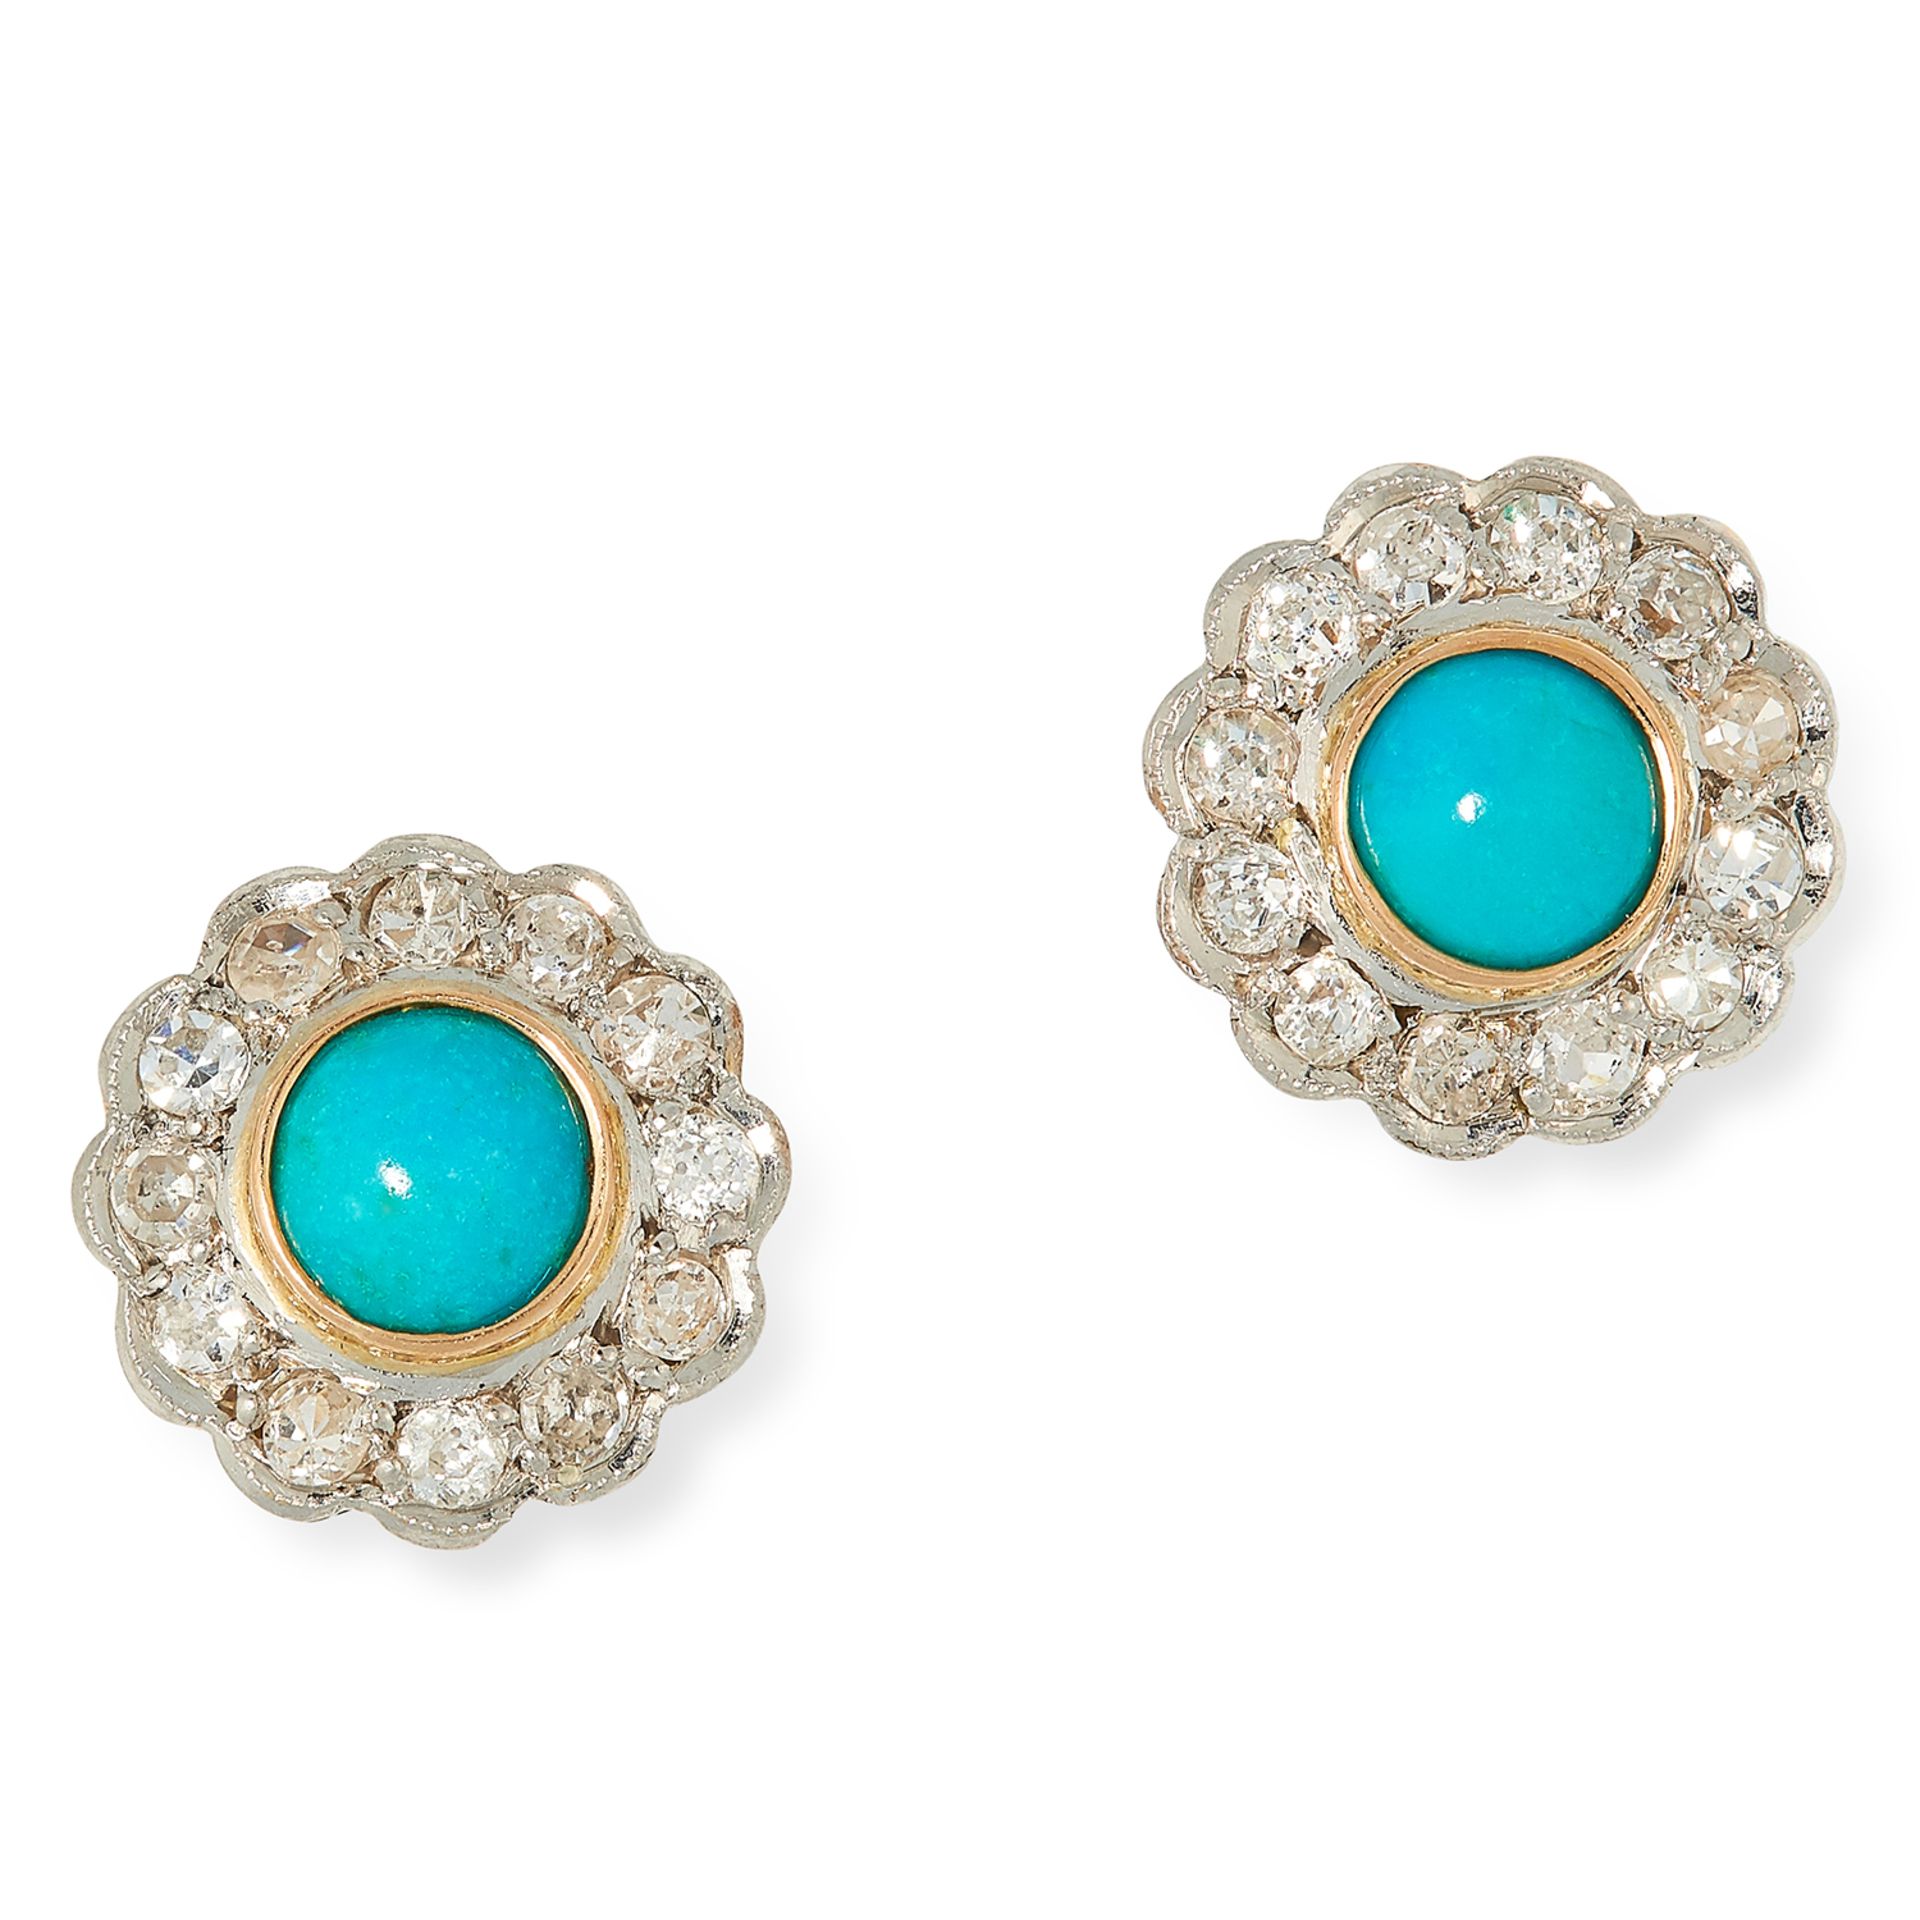 TURQUOISE AND DIAMOND CLUSTER EARRINGS each set with a cabochon turquoise in a border of old cut